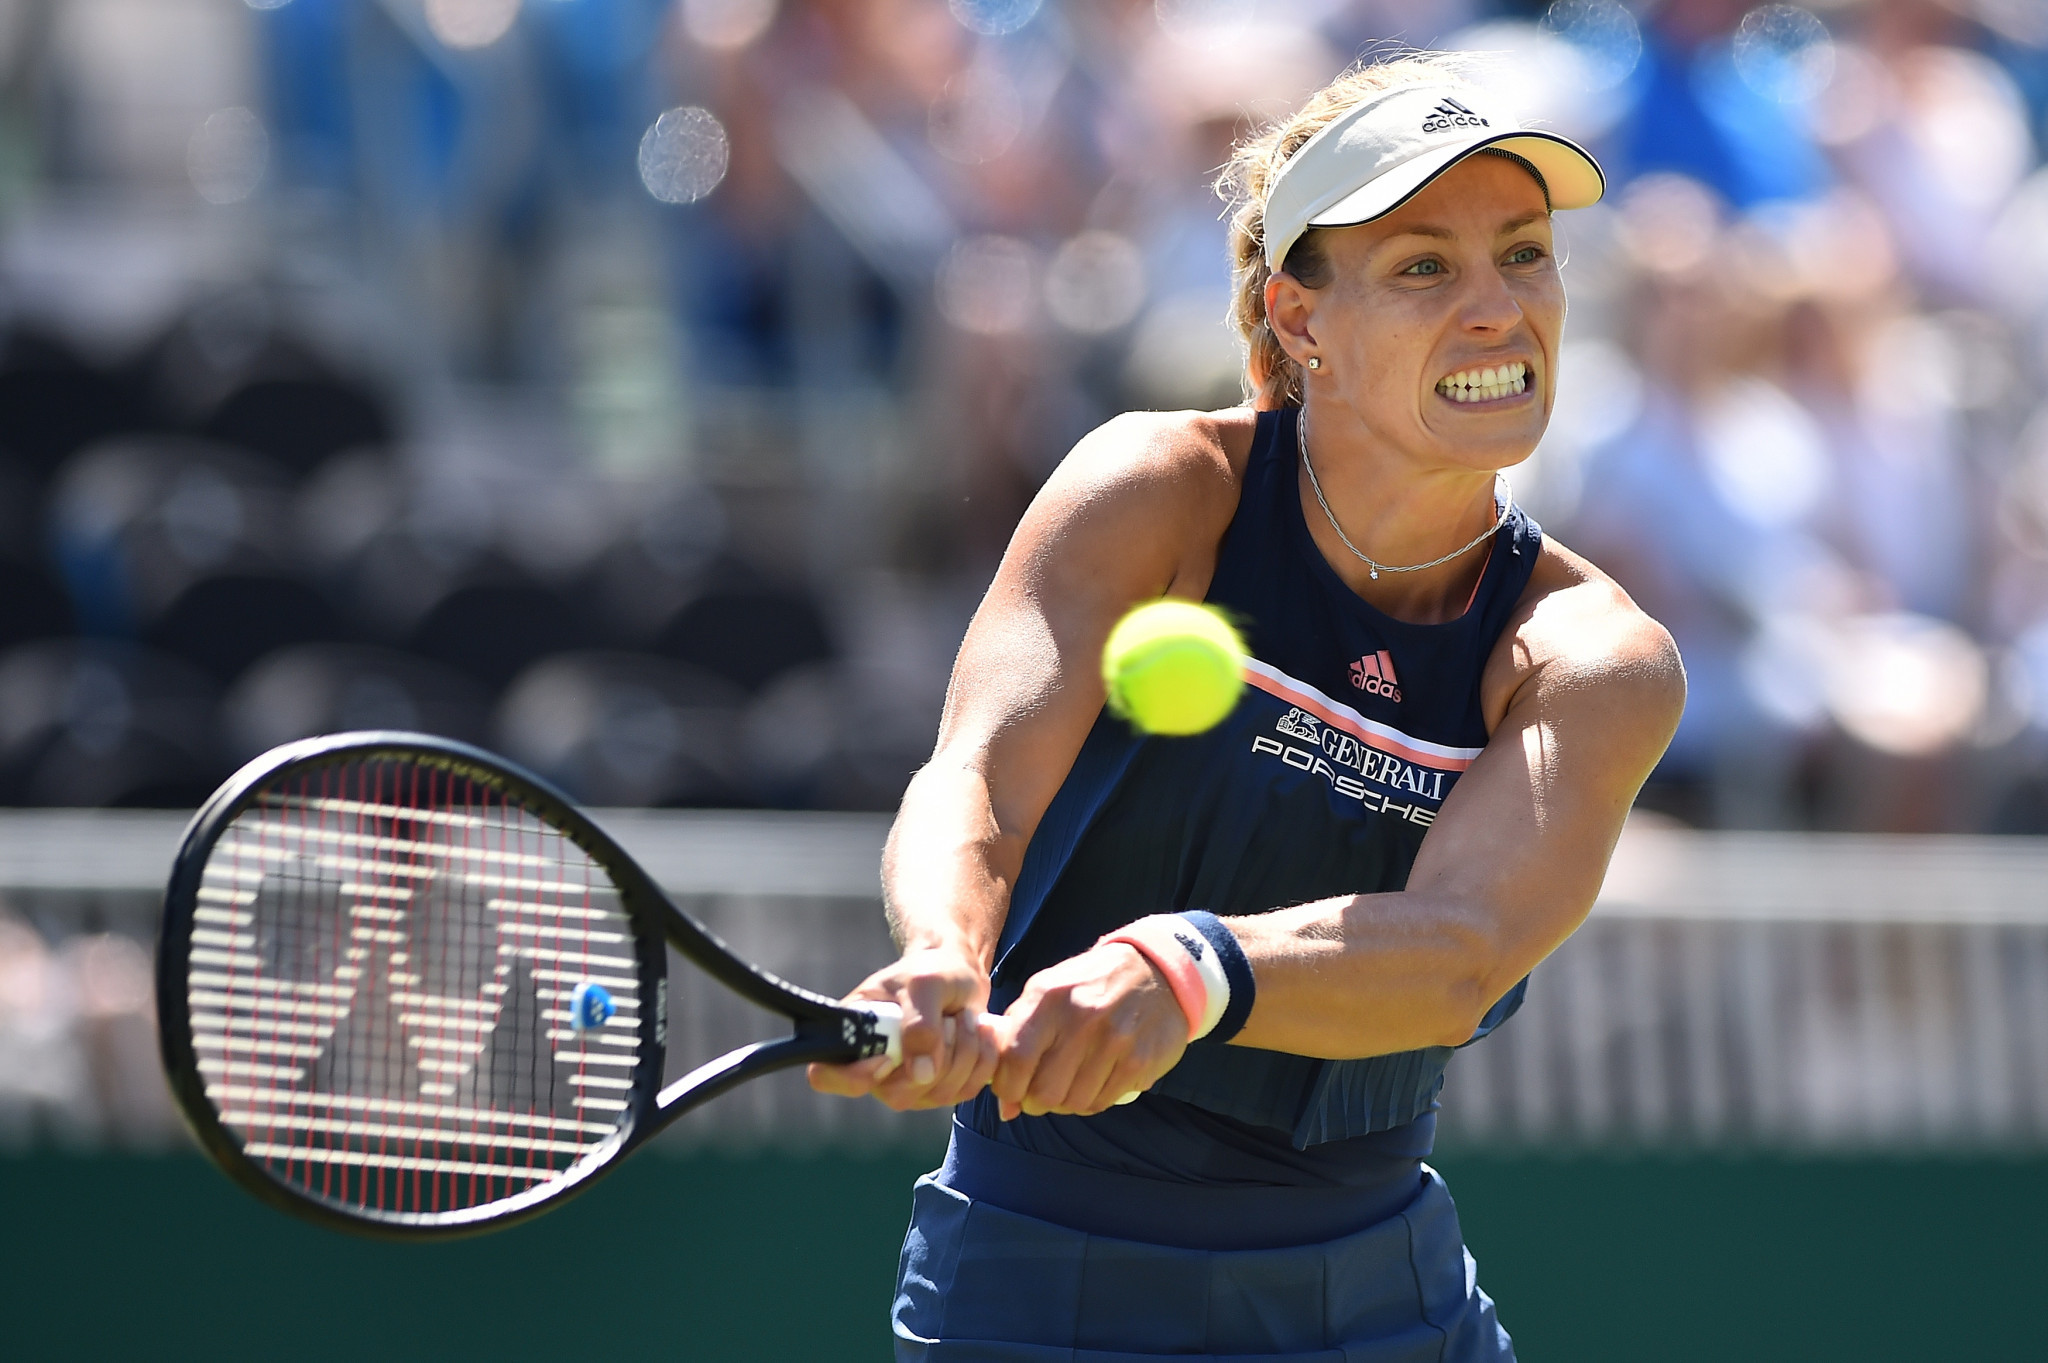 German fourth seed Angelique Kerber is also through after she eased to a 6-1, 6-1 demolition of American Danielle Collins at the WTA Eastbourne International ©Getty Images